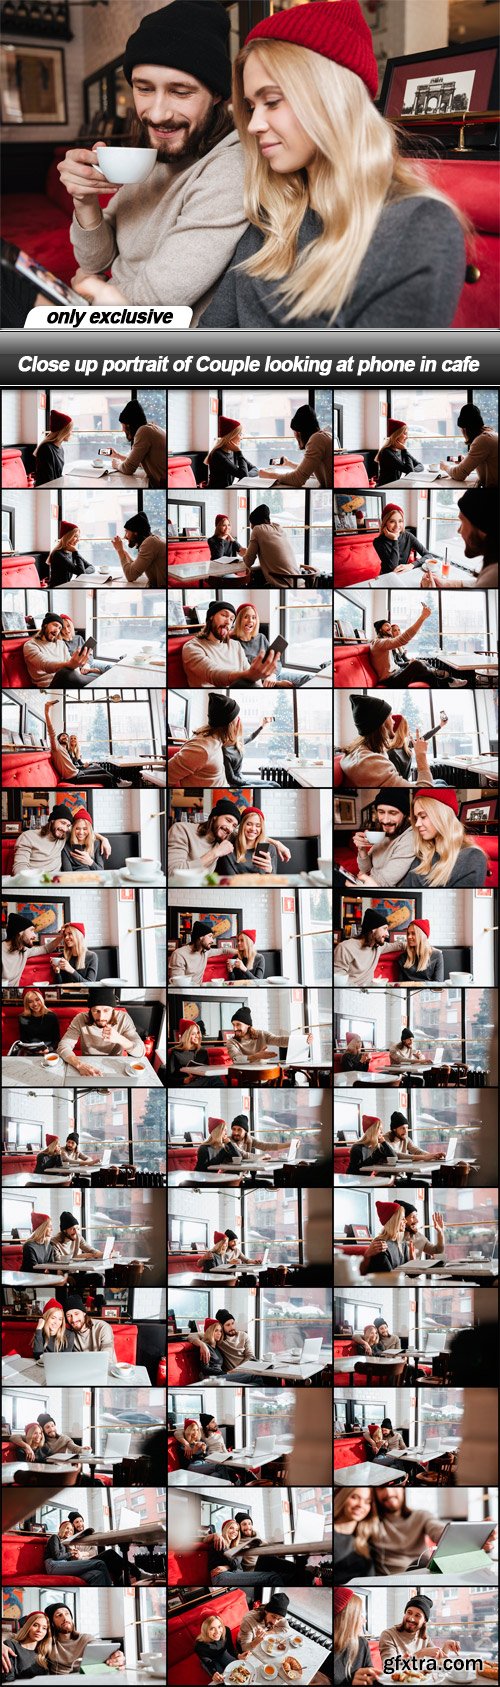 Close up portrait of Couple looking at phone in cafe - 39 EPS